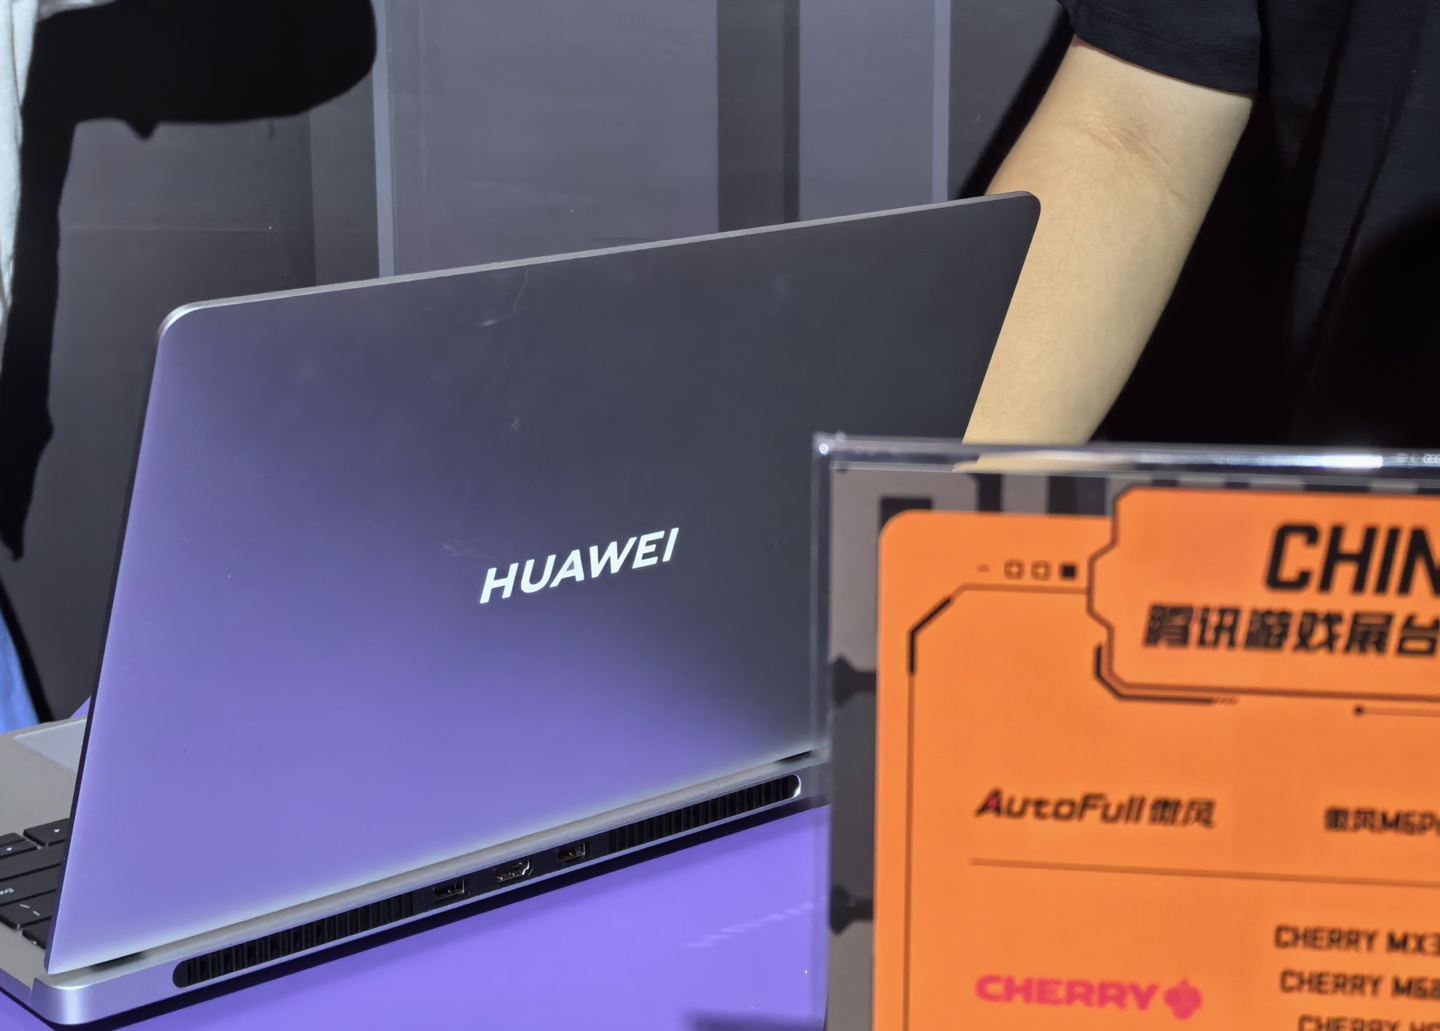 Huawei gaming notebook flashes in ChinaJoy2024: suspected to be named GT, with LOGO light on the exterior